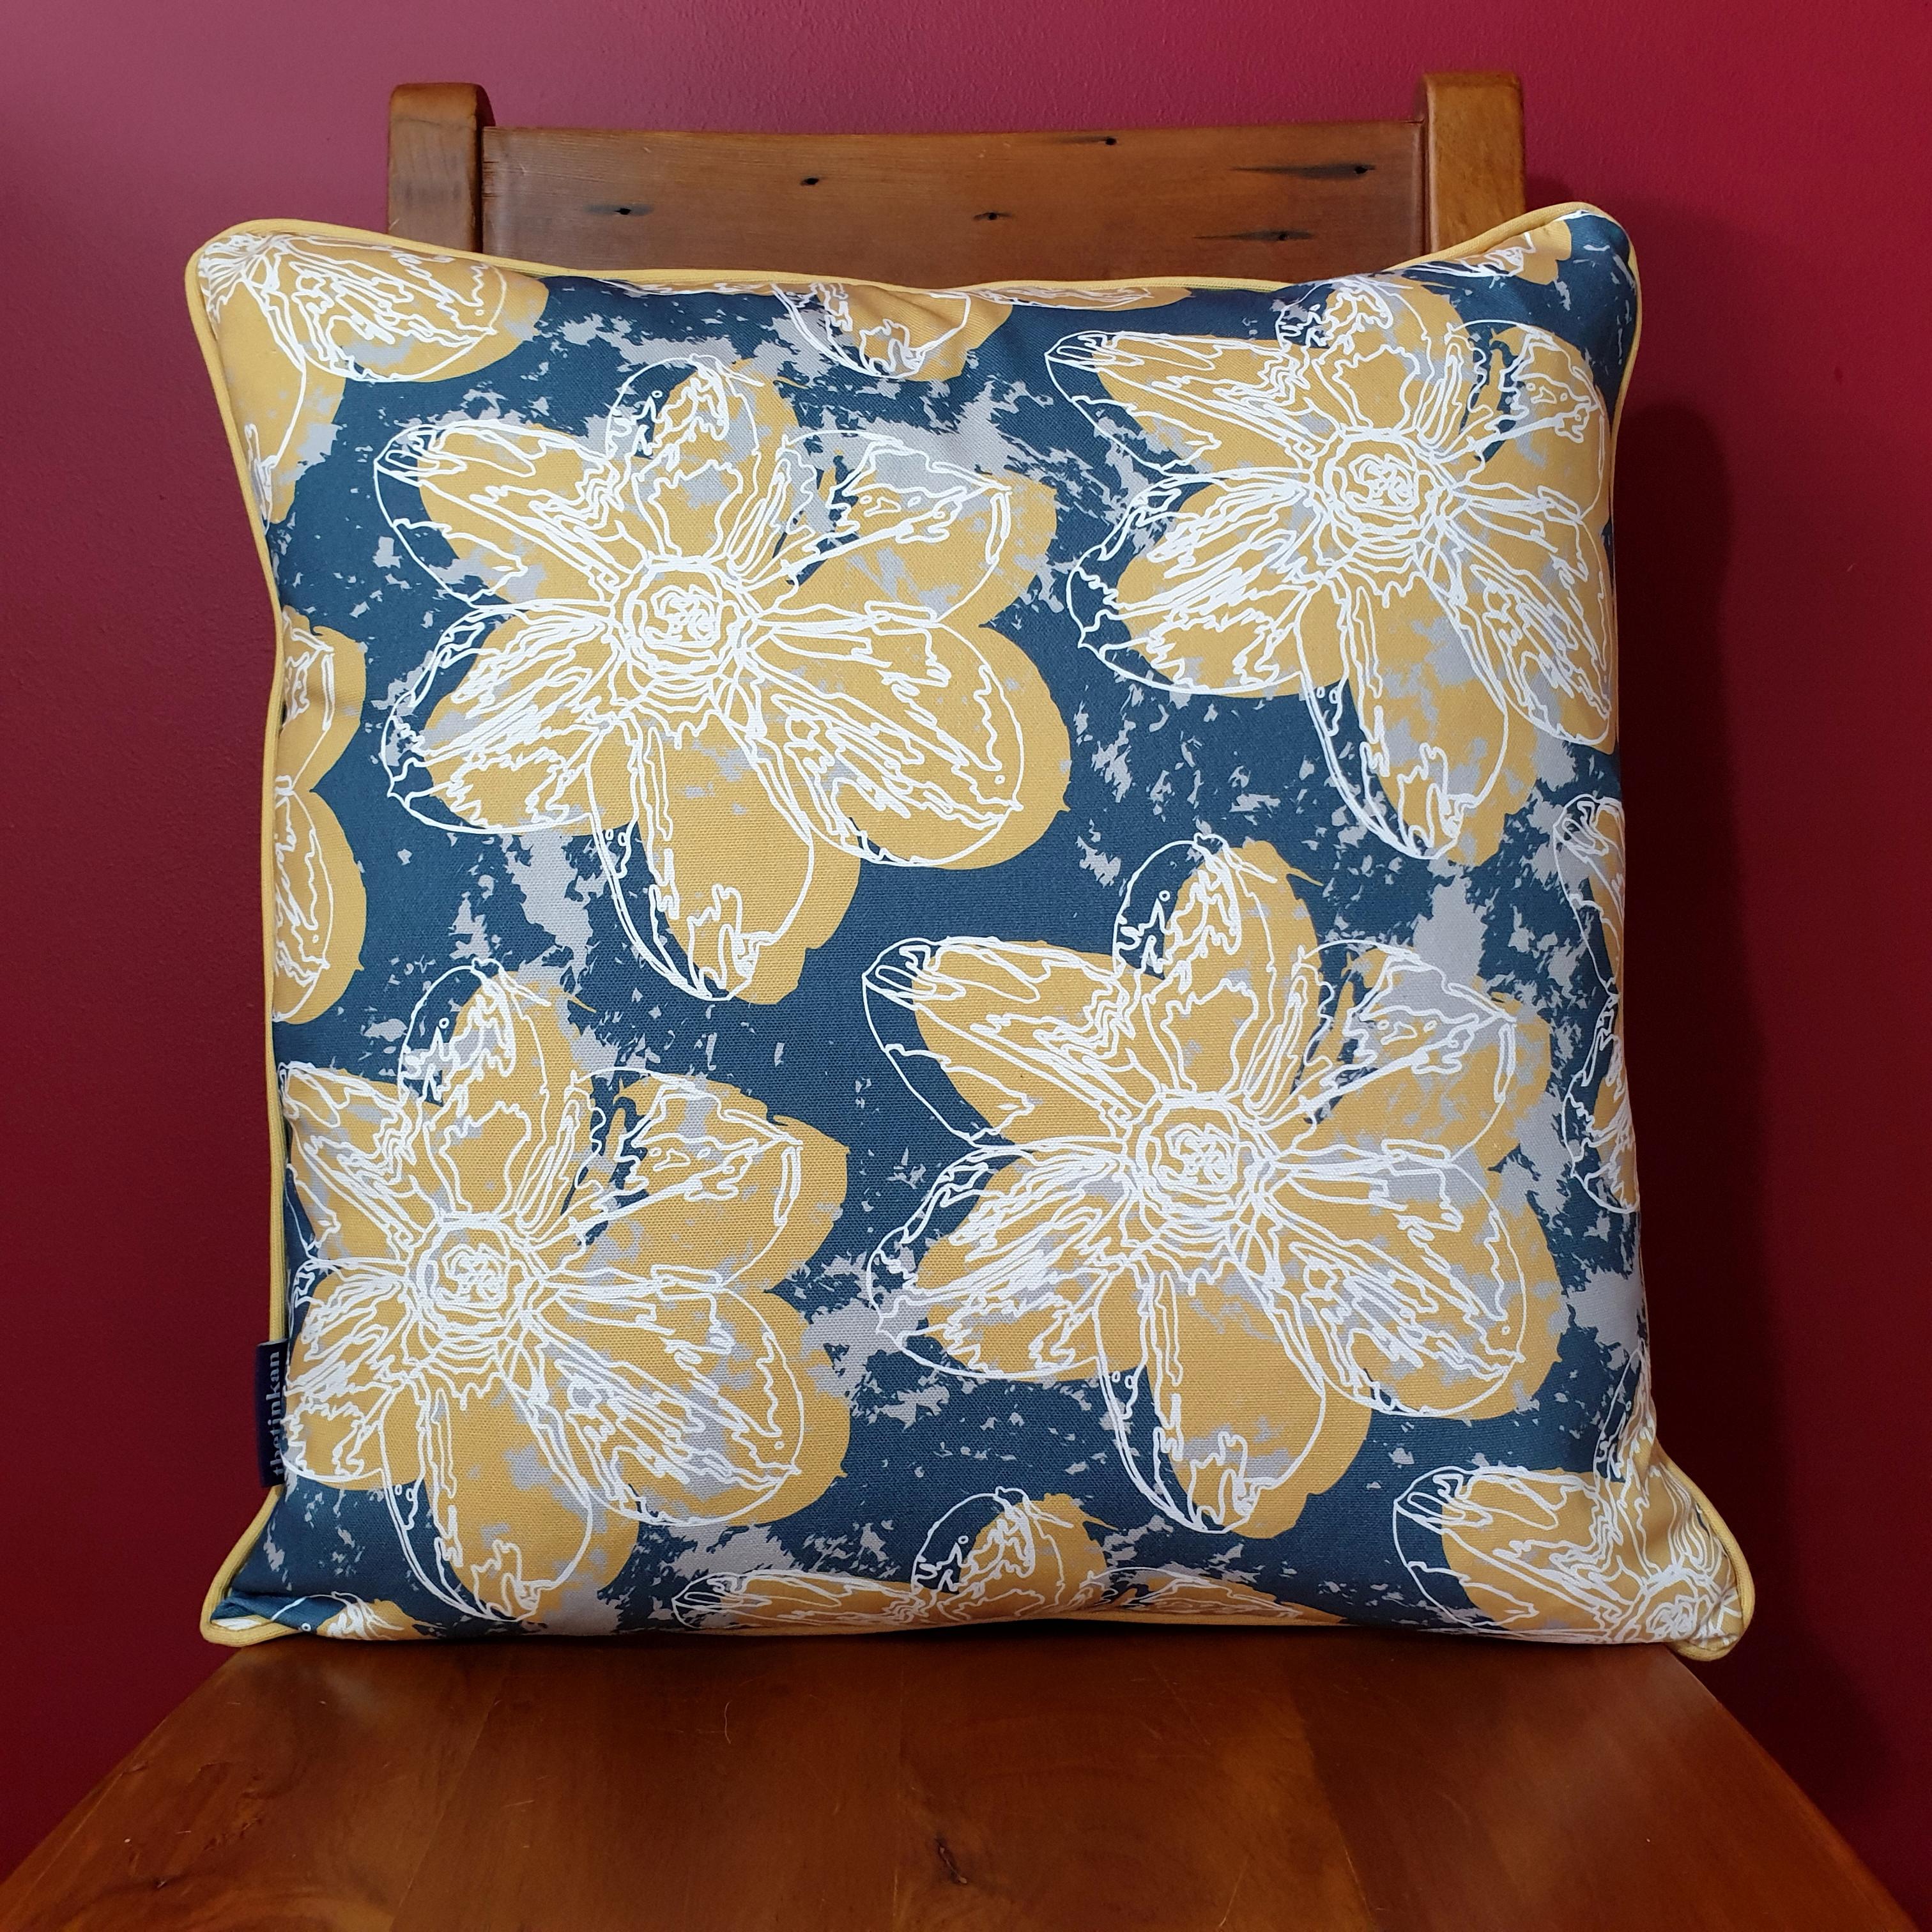 Double-sided 51cm square Flower Splash cushion designed by thetinkan. Mustard yellow narcissus flower and mustard yellow piping with white traced outline set within an oxford blue background with pale grey paint splashes. Available with an optional luxury cushion inner pad. VIEW PRODUCT >>